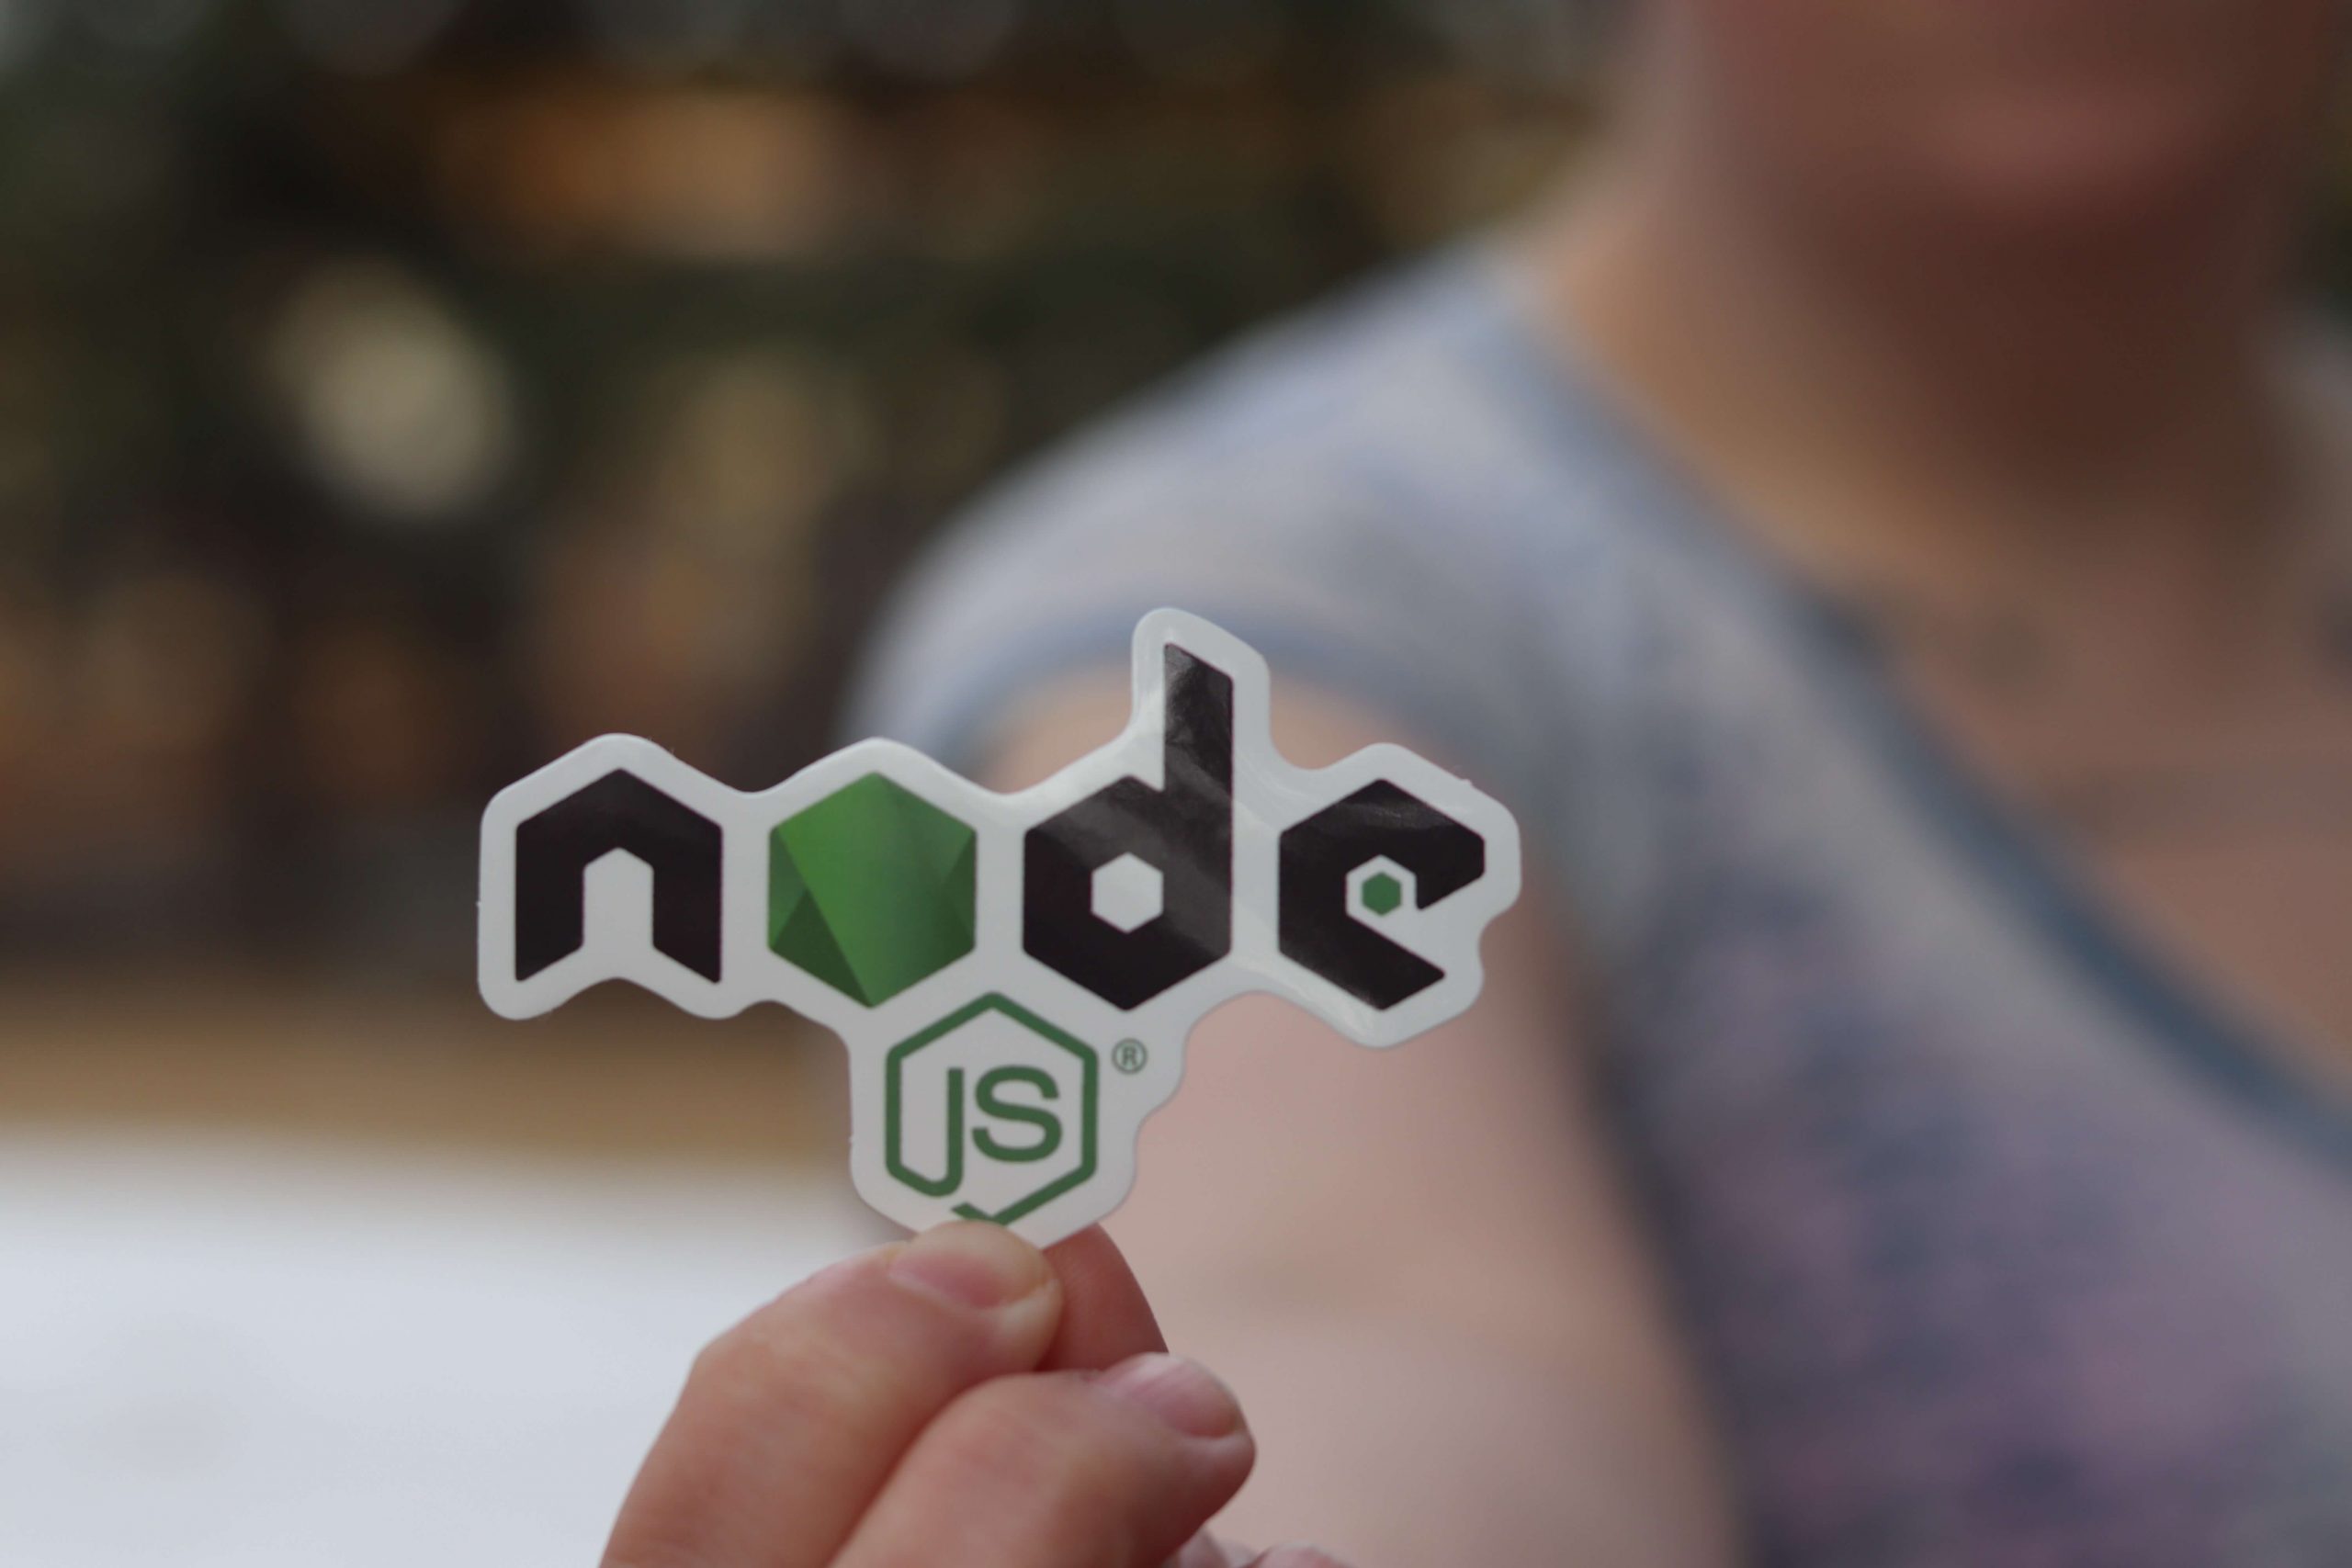 Node JS 19 is now available!